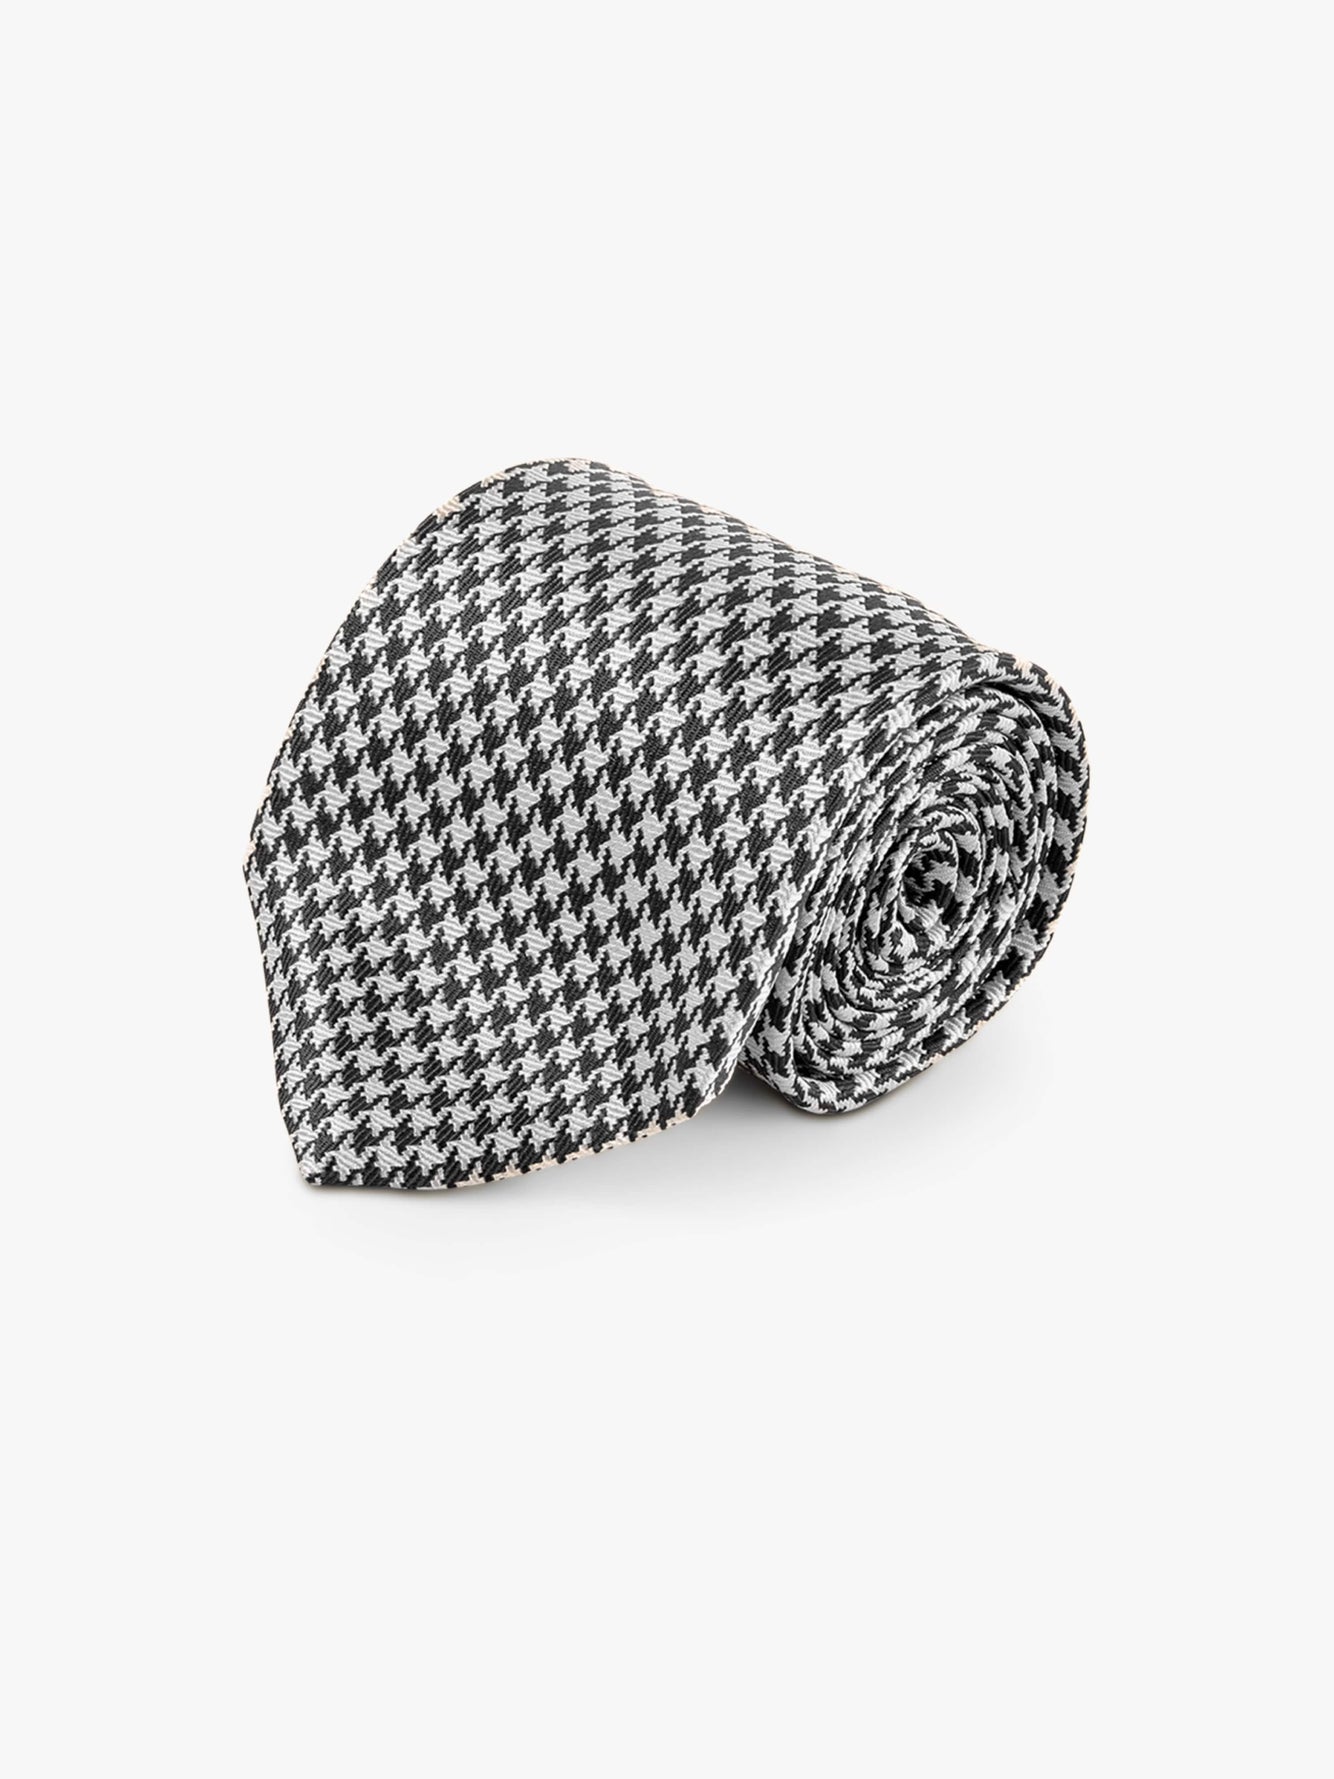 Houndstooth Tie - Grand Le Mar